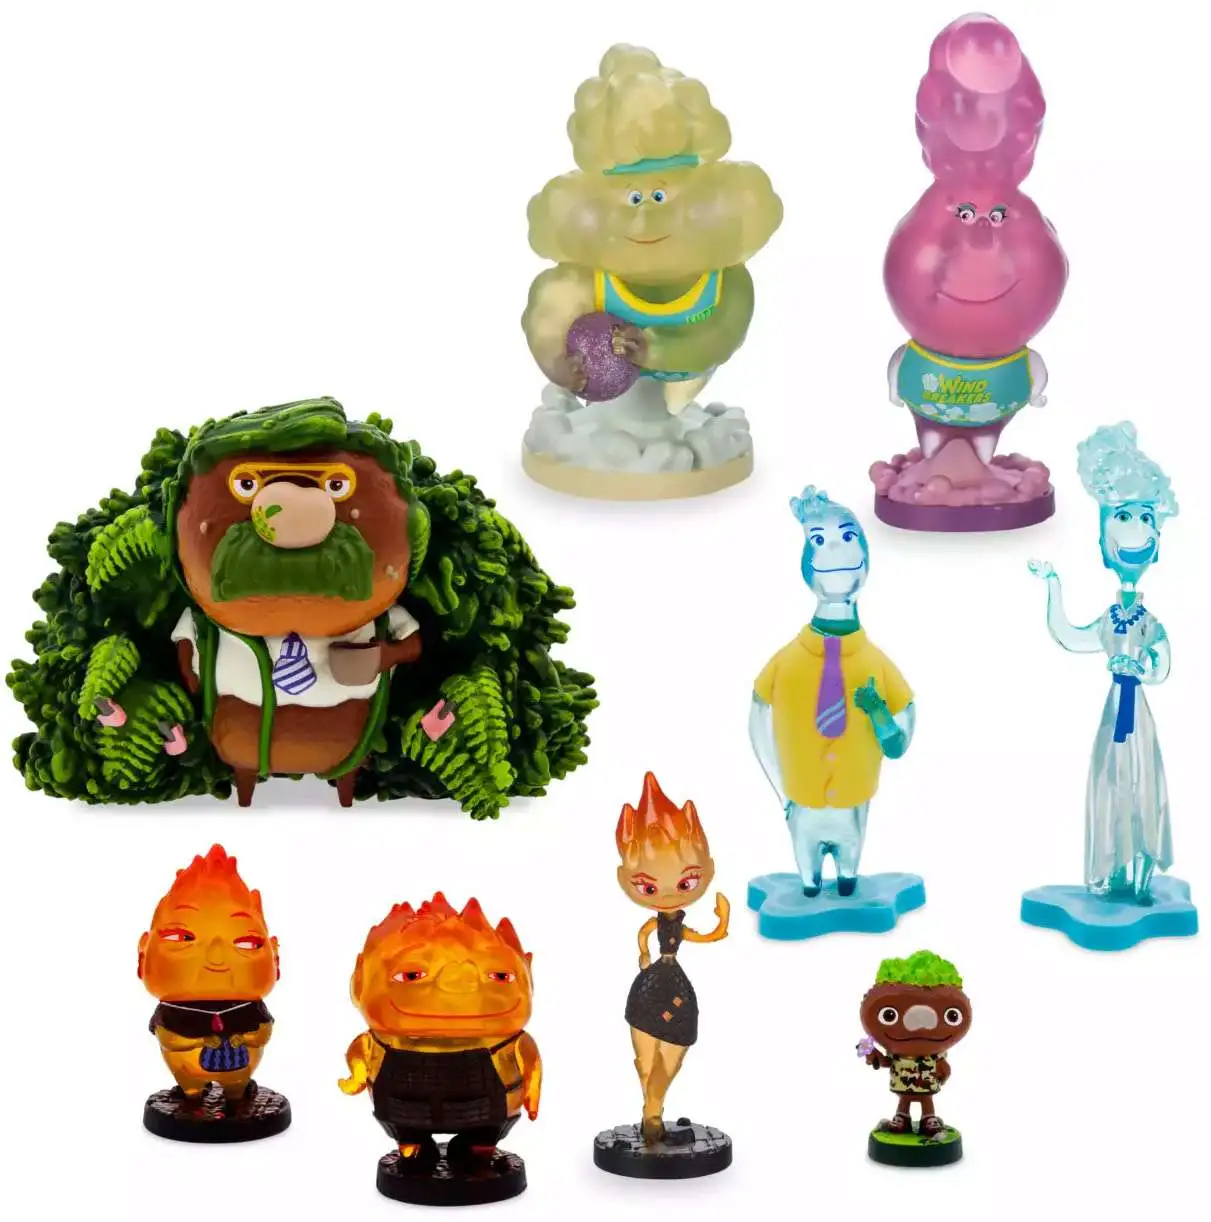 Disney and Pixar Action Figure 3 Pack of Elemental Characters